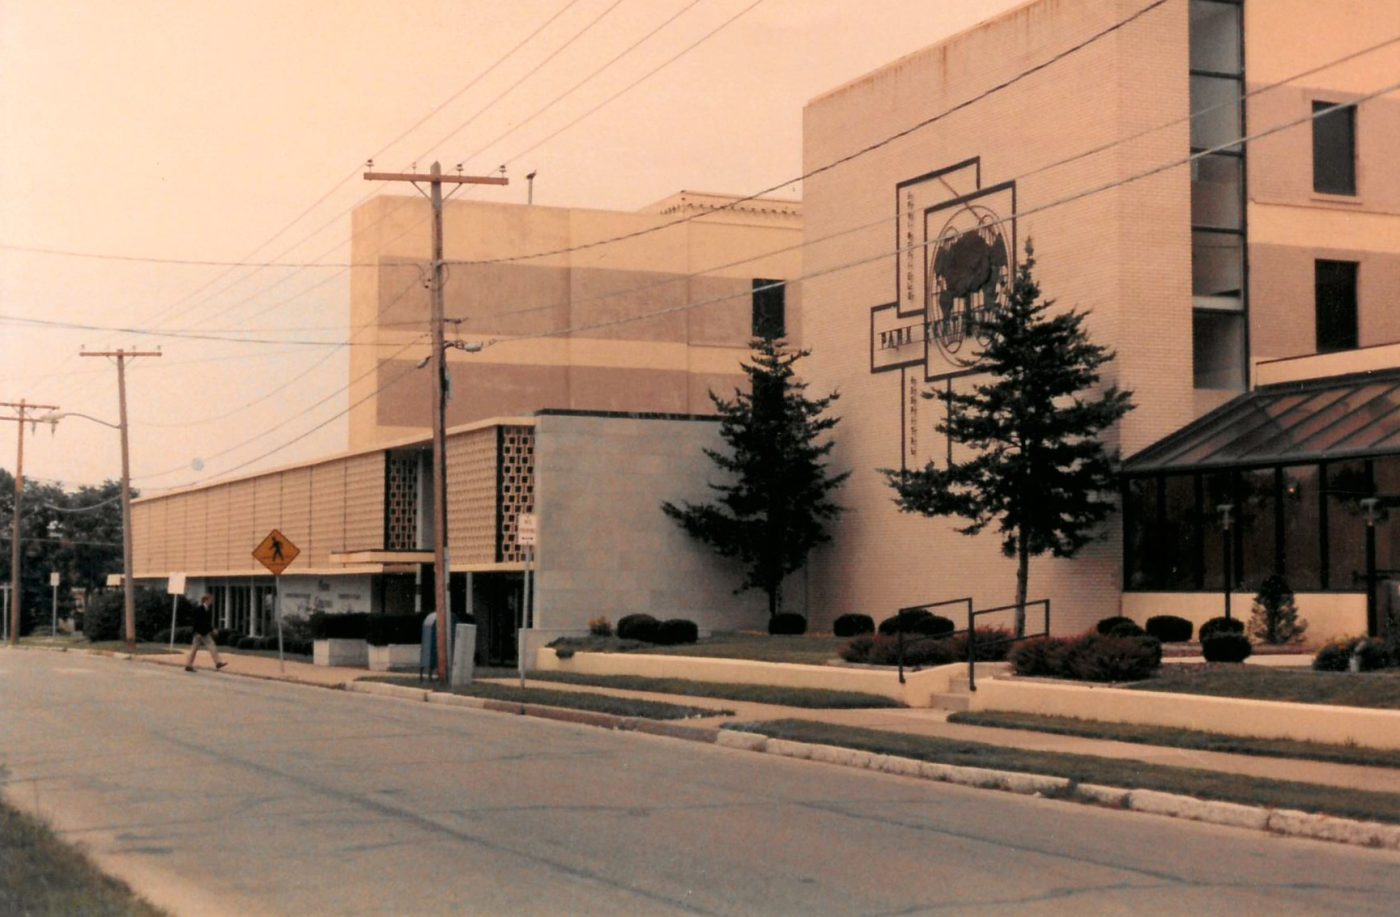 Outside of Building from 1974